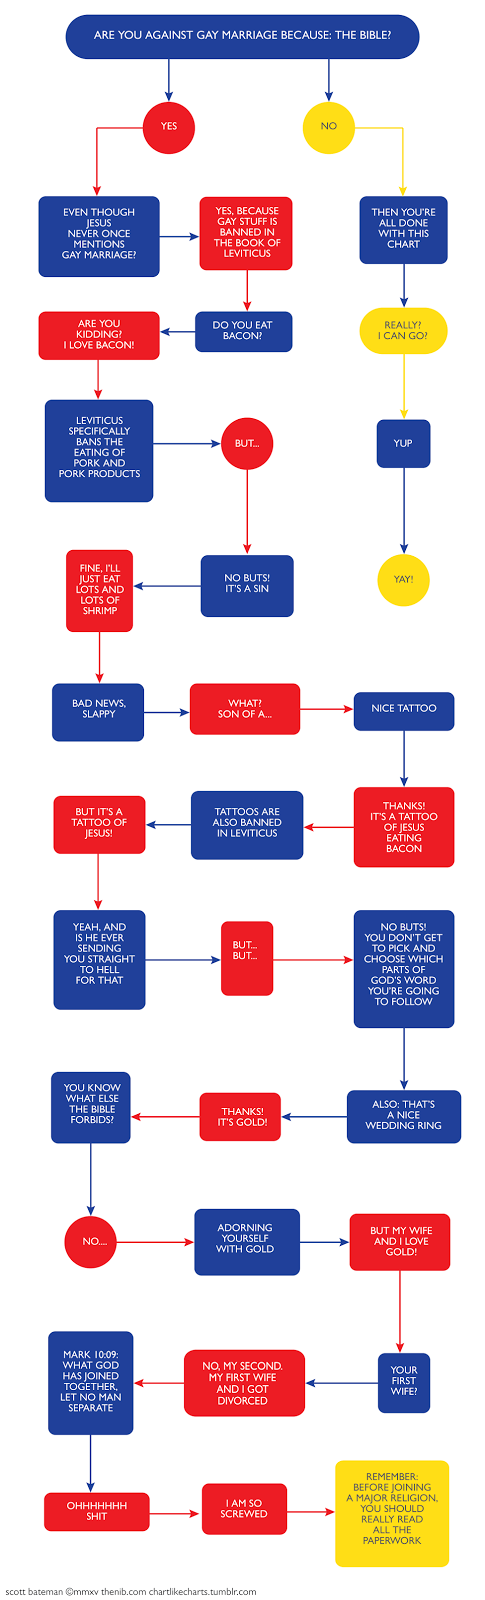 Flowchart ridiculing persons who oppose gay marriage because of a single verse in Leviticus by pointing out other Biblical prohibitions (eating pork and shellfish, for example) that they ignore.